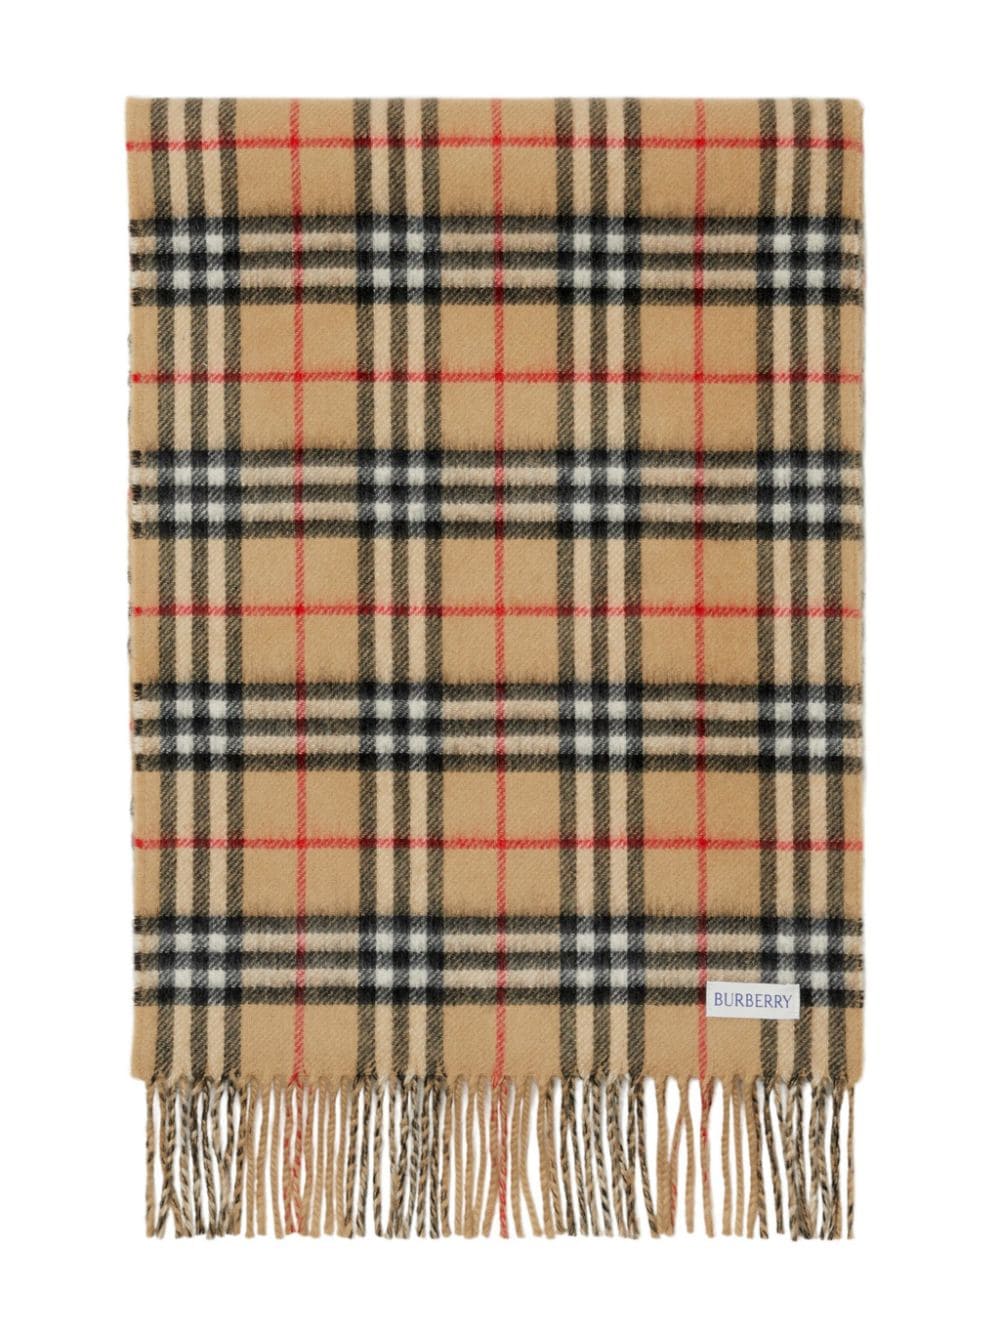 BURBERRY Vintage Check Scarf in Tan for Men and Women